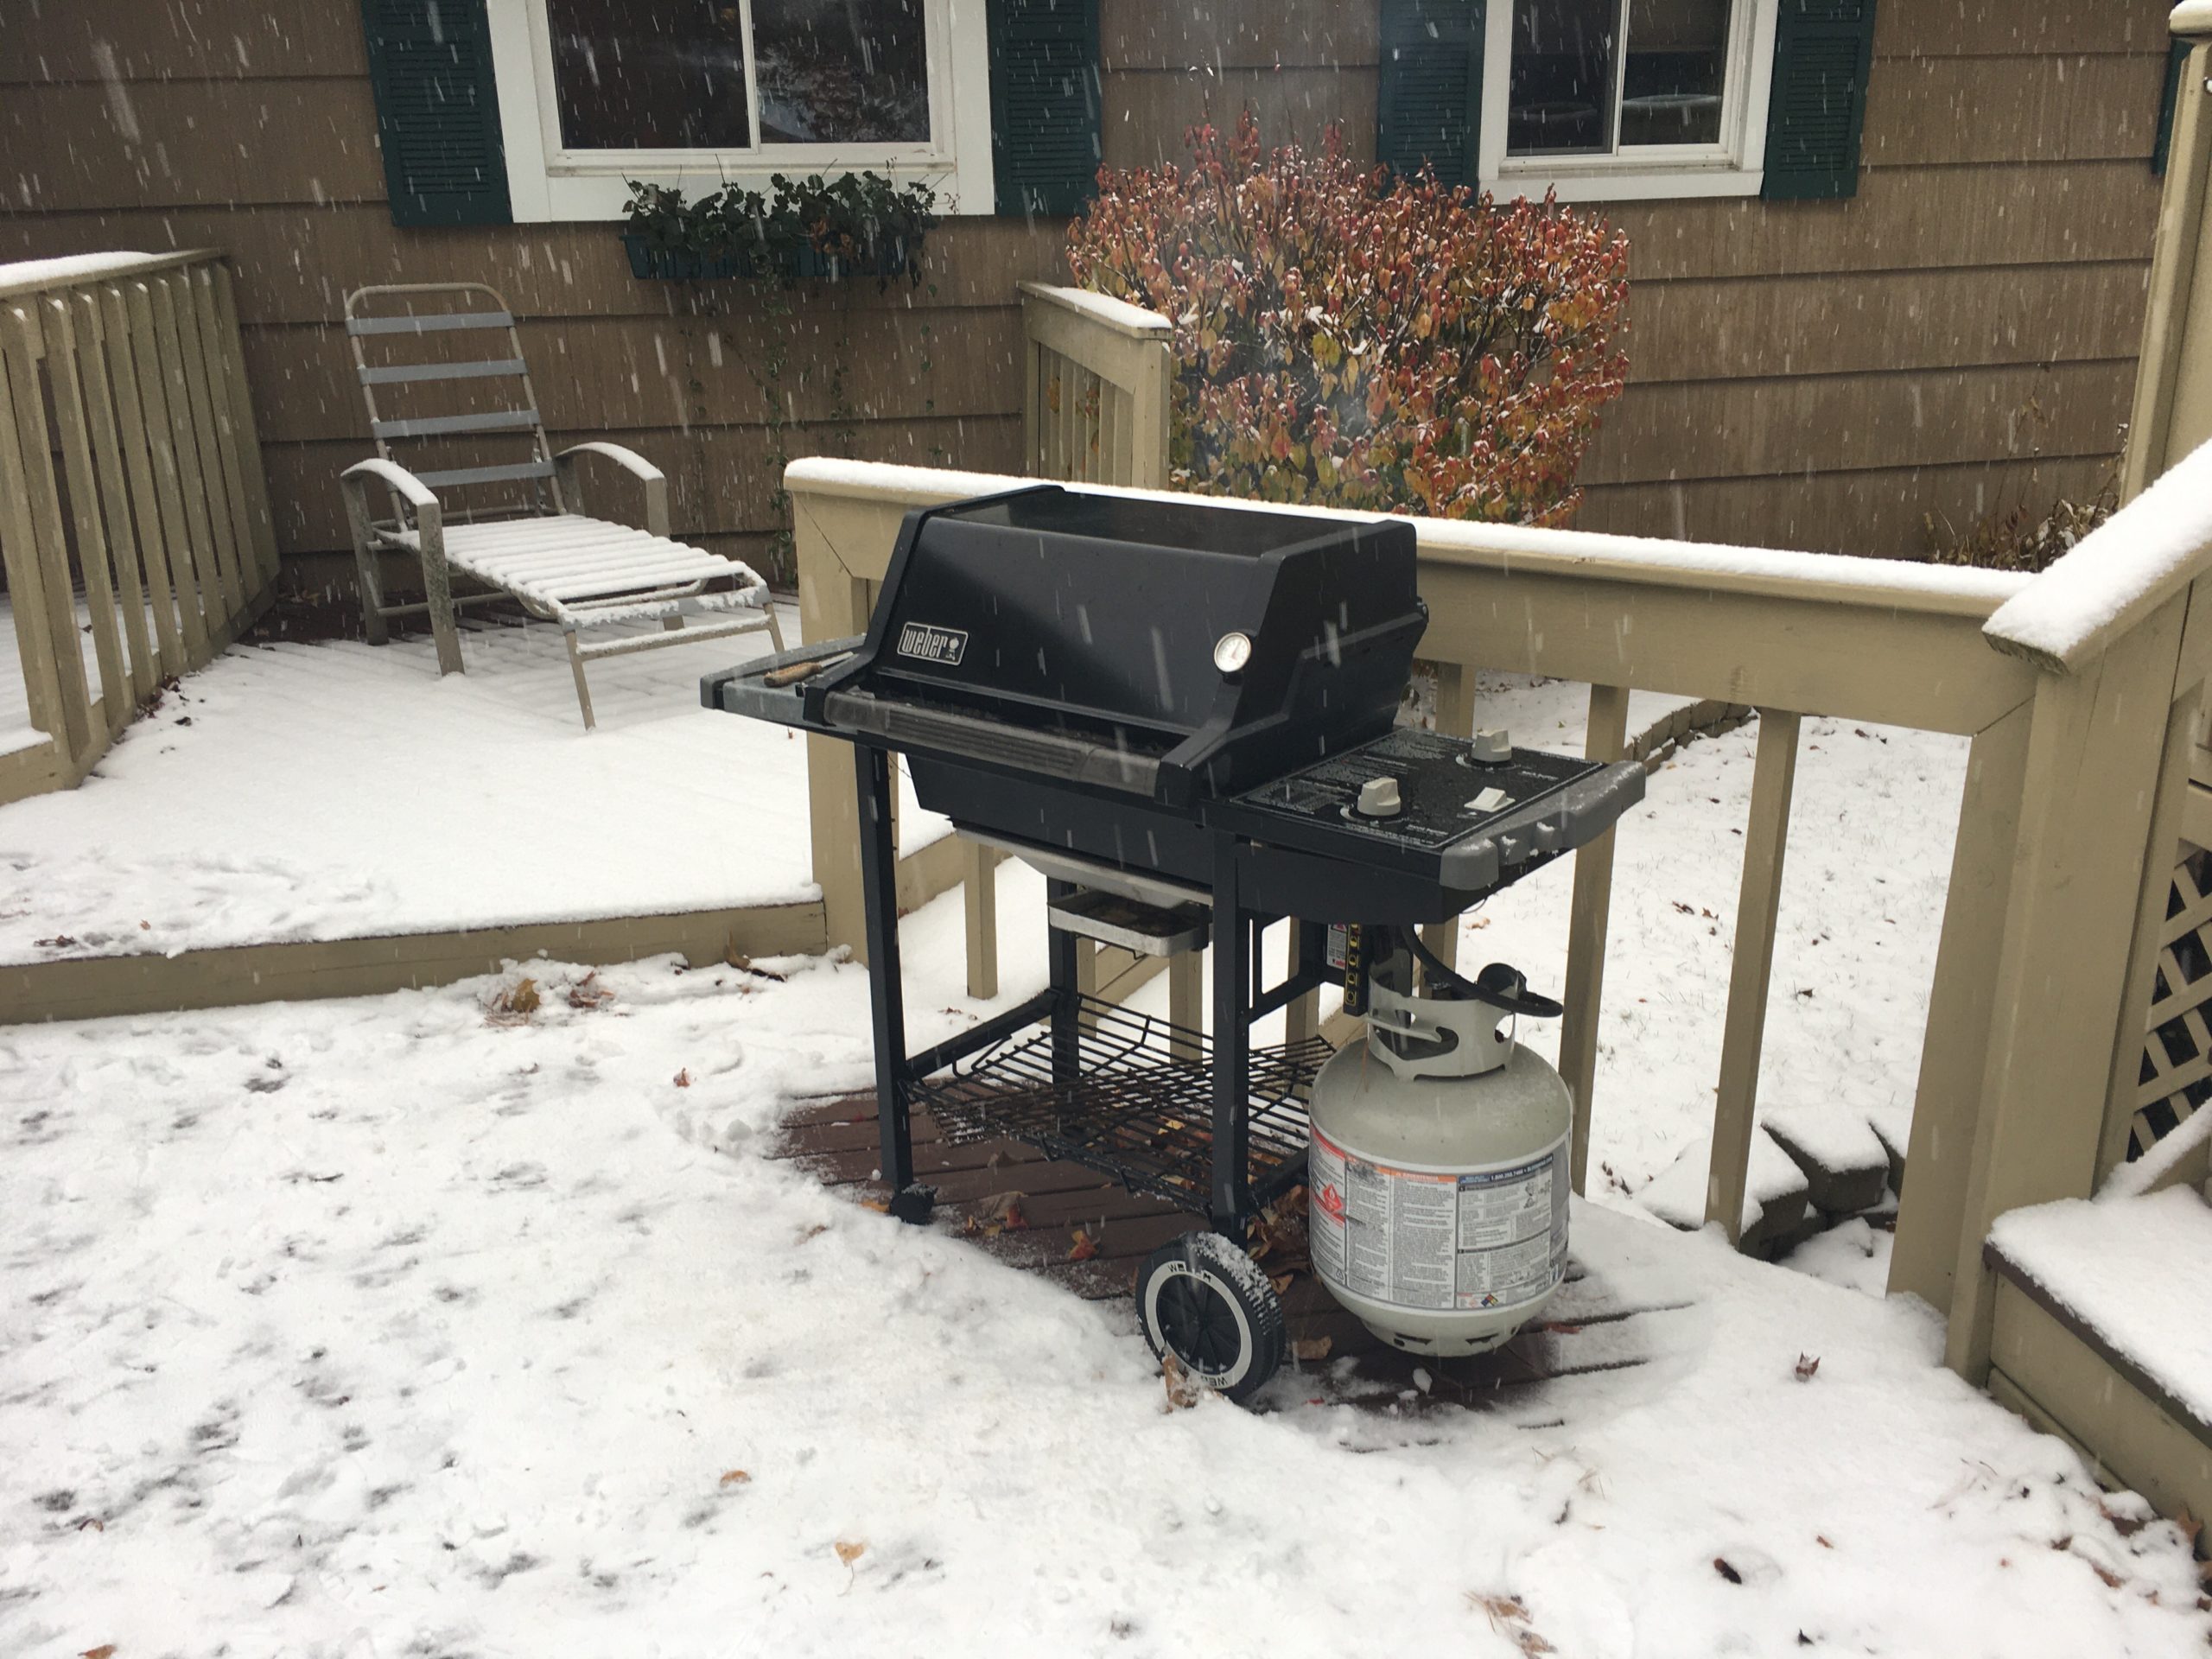 Grill in snow